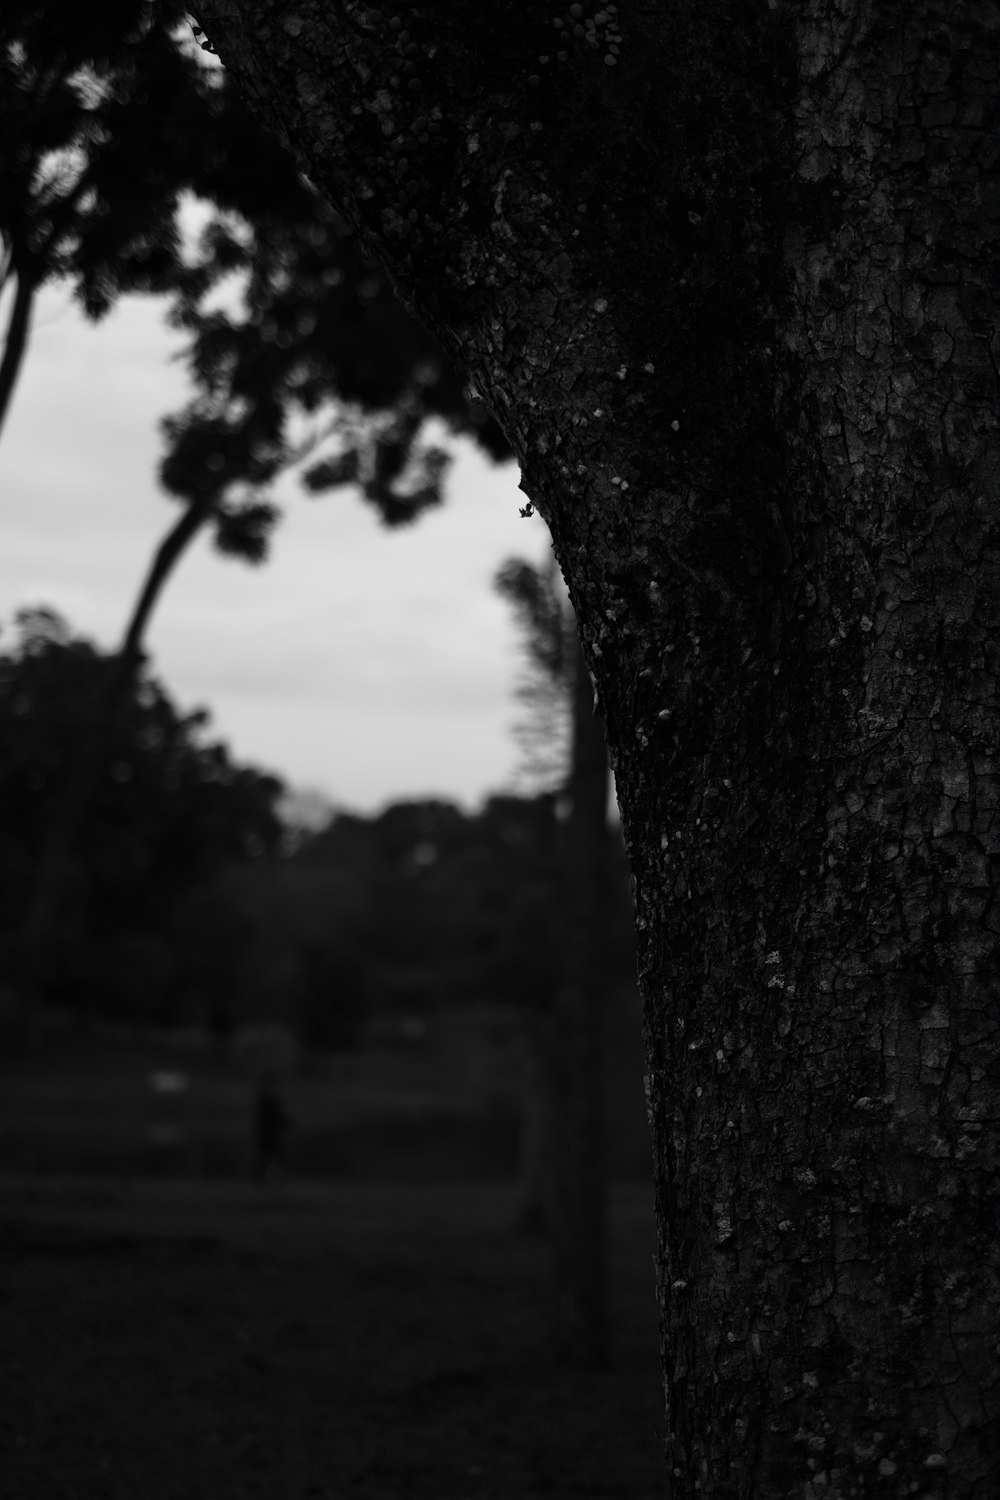 a black and white photo of a tree in a park